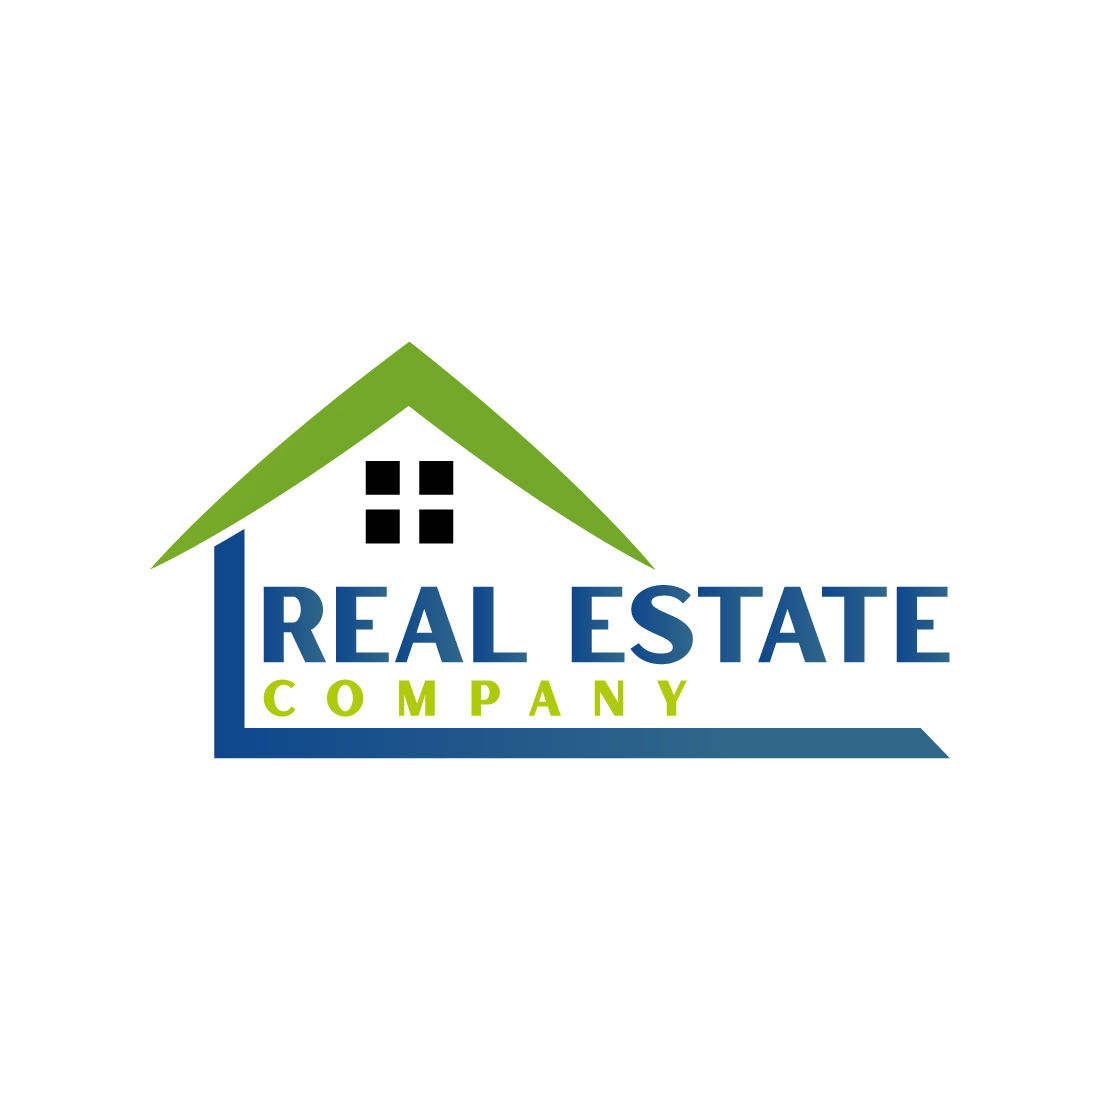 Real estate logo with green, dark blue color preview image.